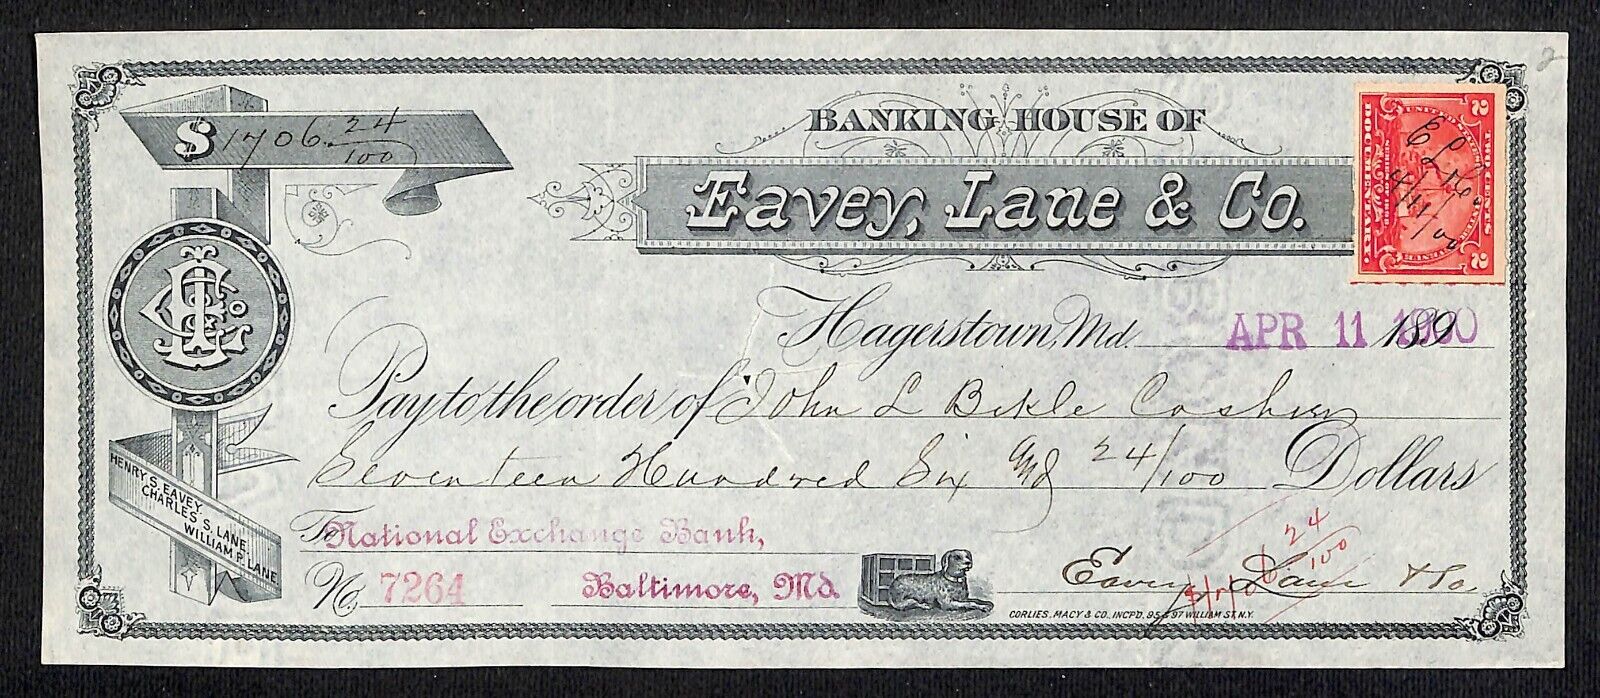 Hagerstown Eavey, Lane & Co Banking House Check 1890's/1900 w/ Rev. Stamp